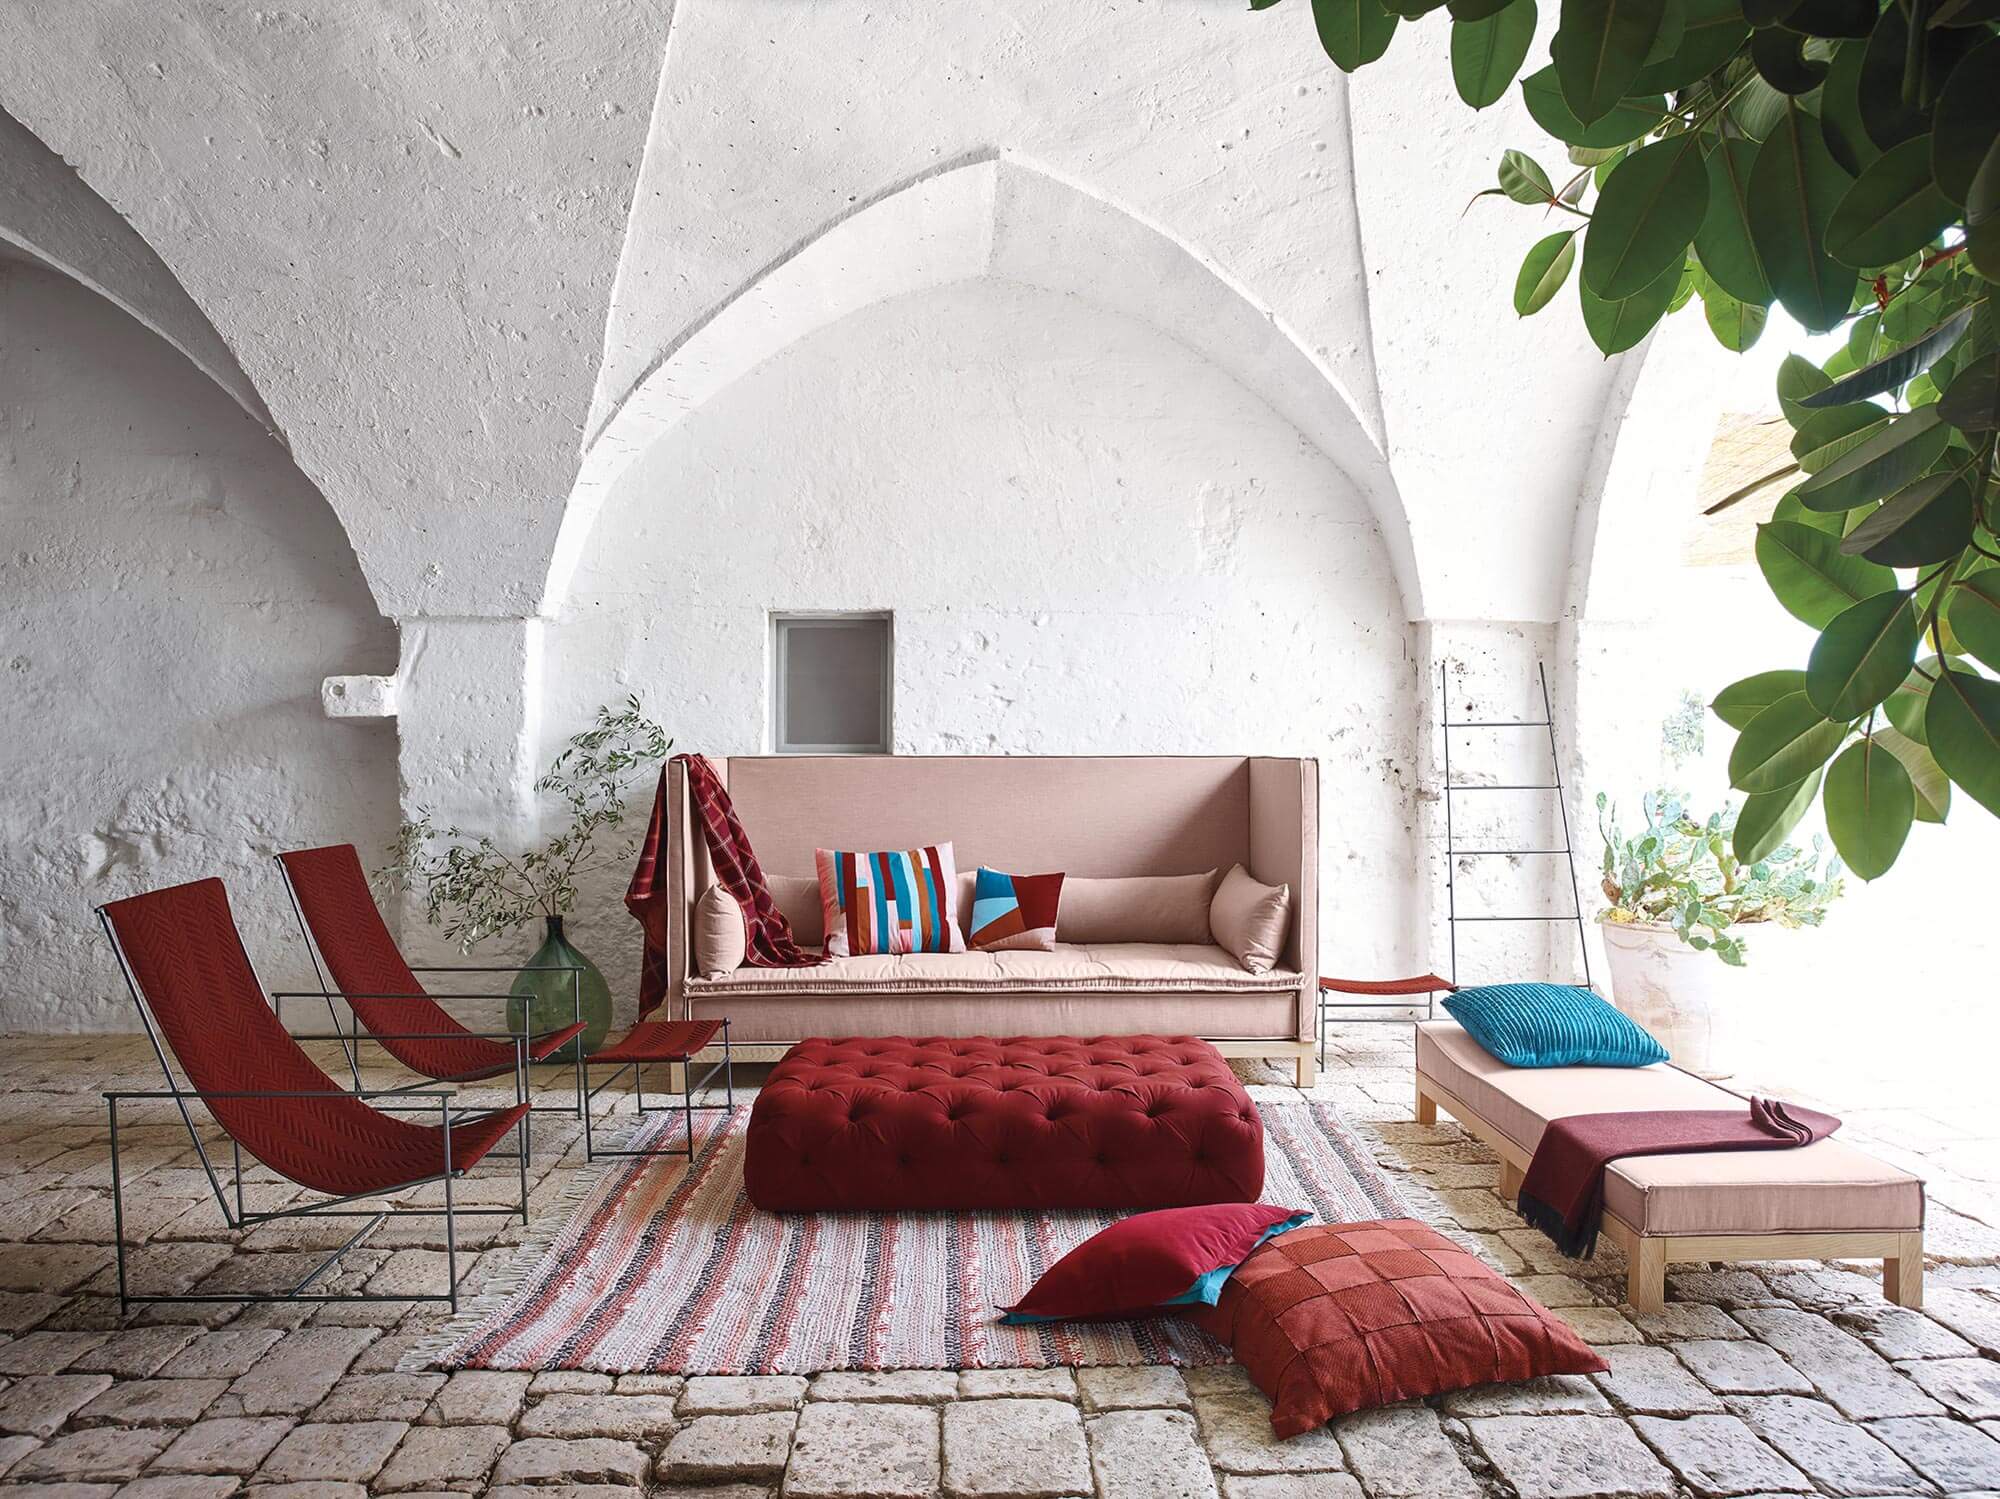 A living room with a large sofa, chairs, and a tufted ottoman in hues of red and pink are made using Sunbrella upholstery fabric